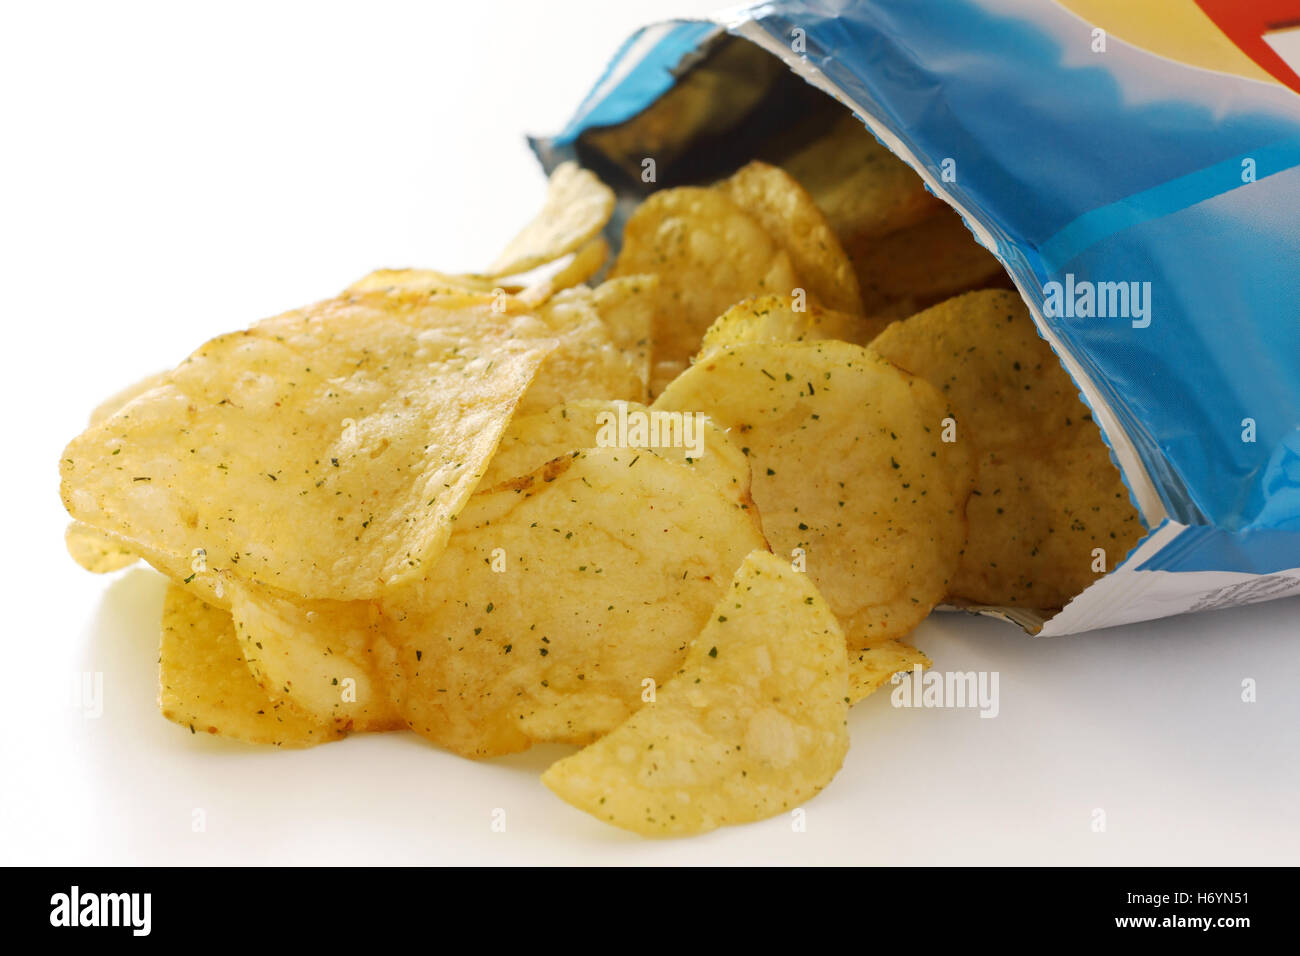 Blue packet of crisps with cheese and spring onion flavour Stock Photo